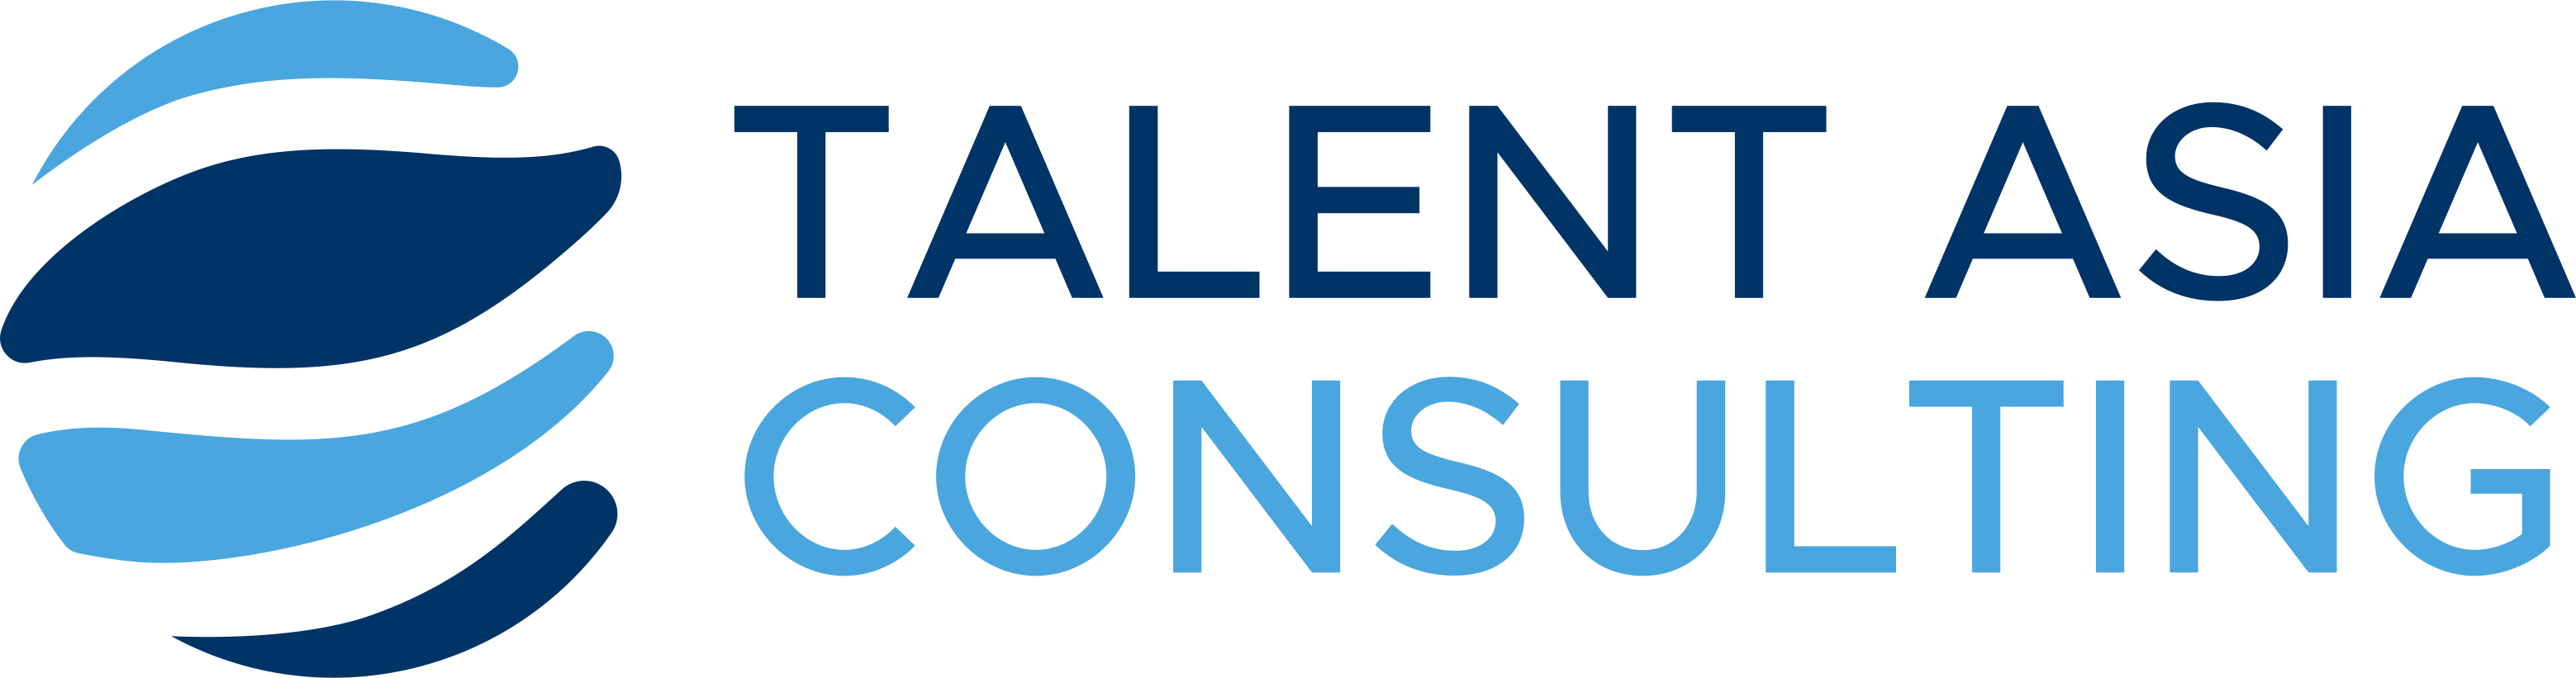 Talent Asia Consulting